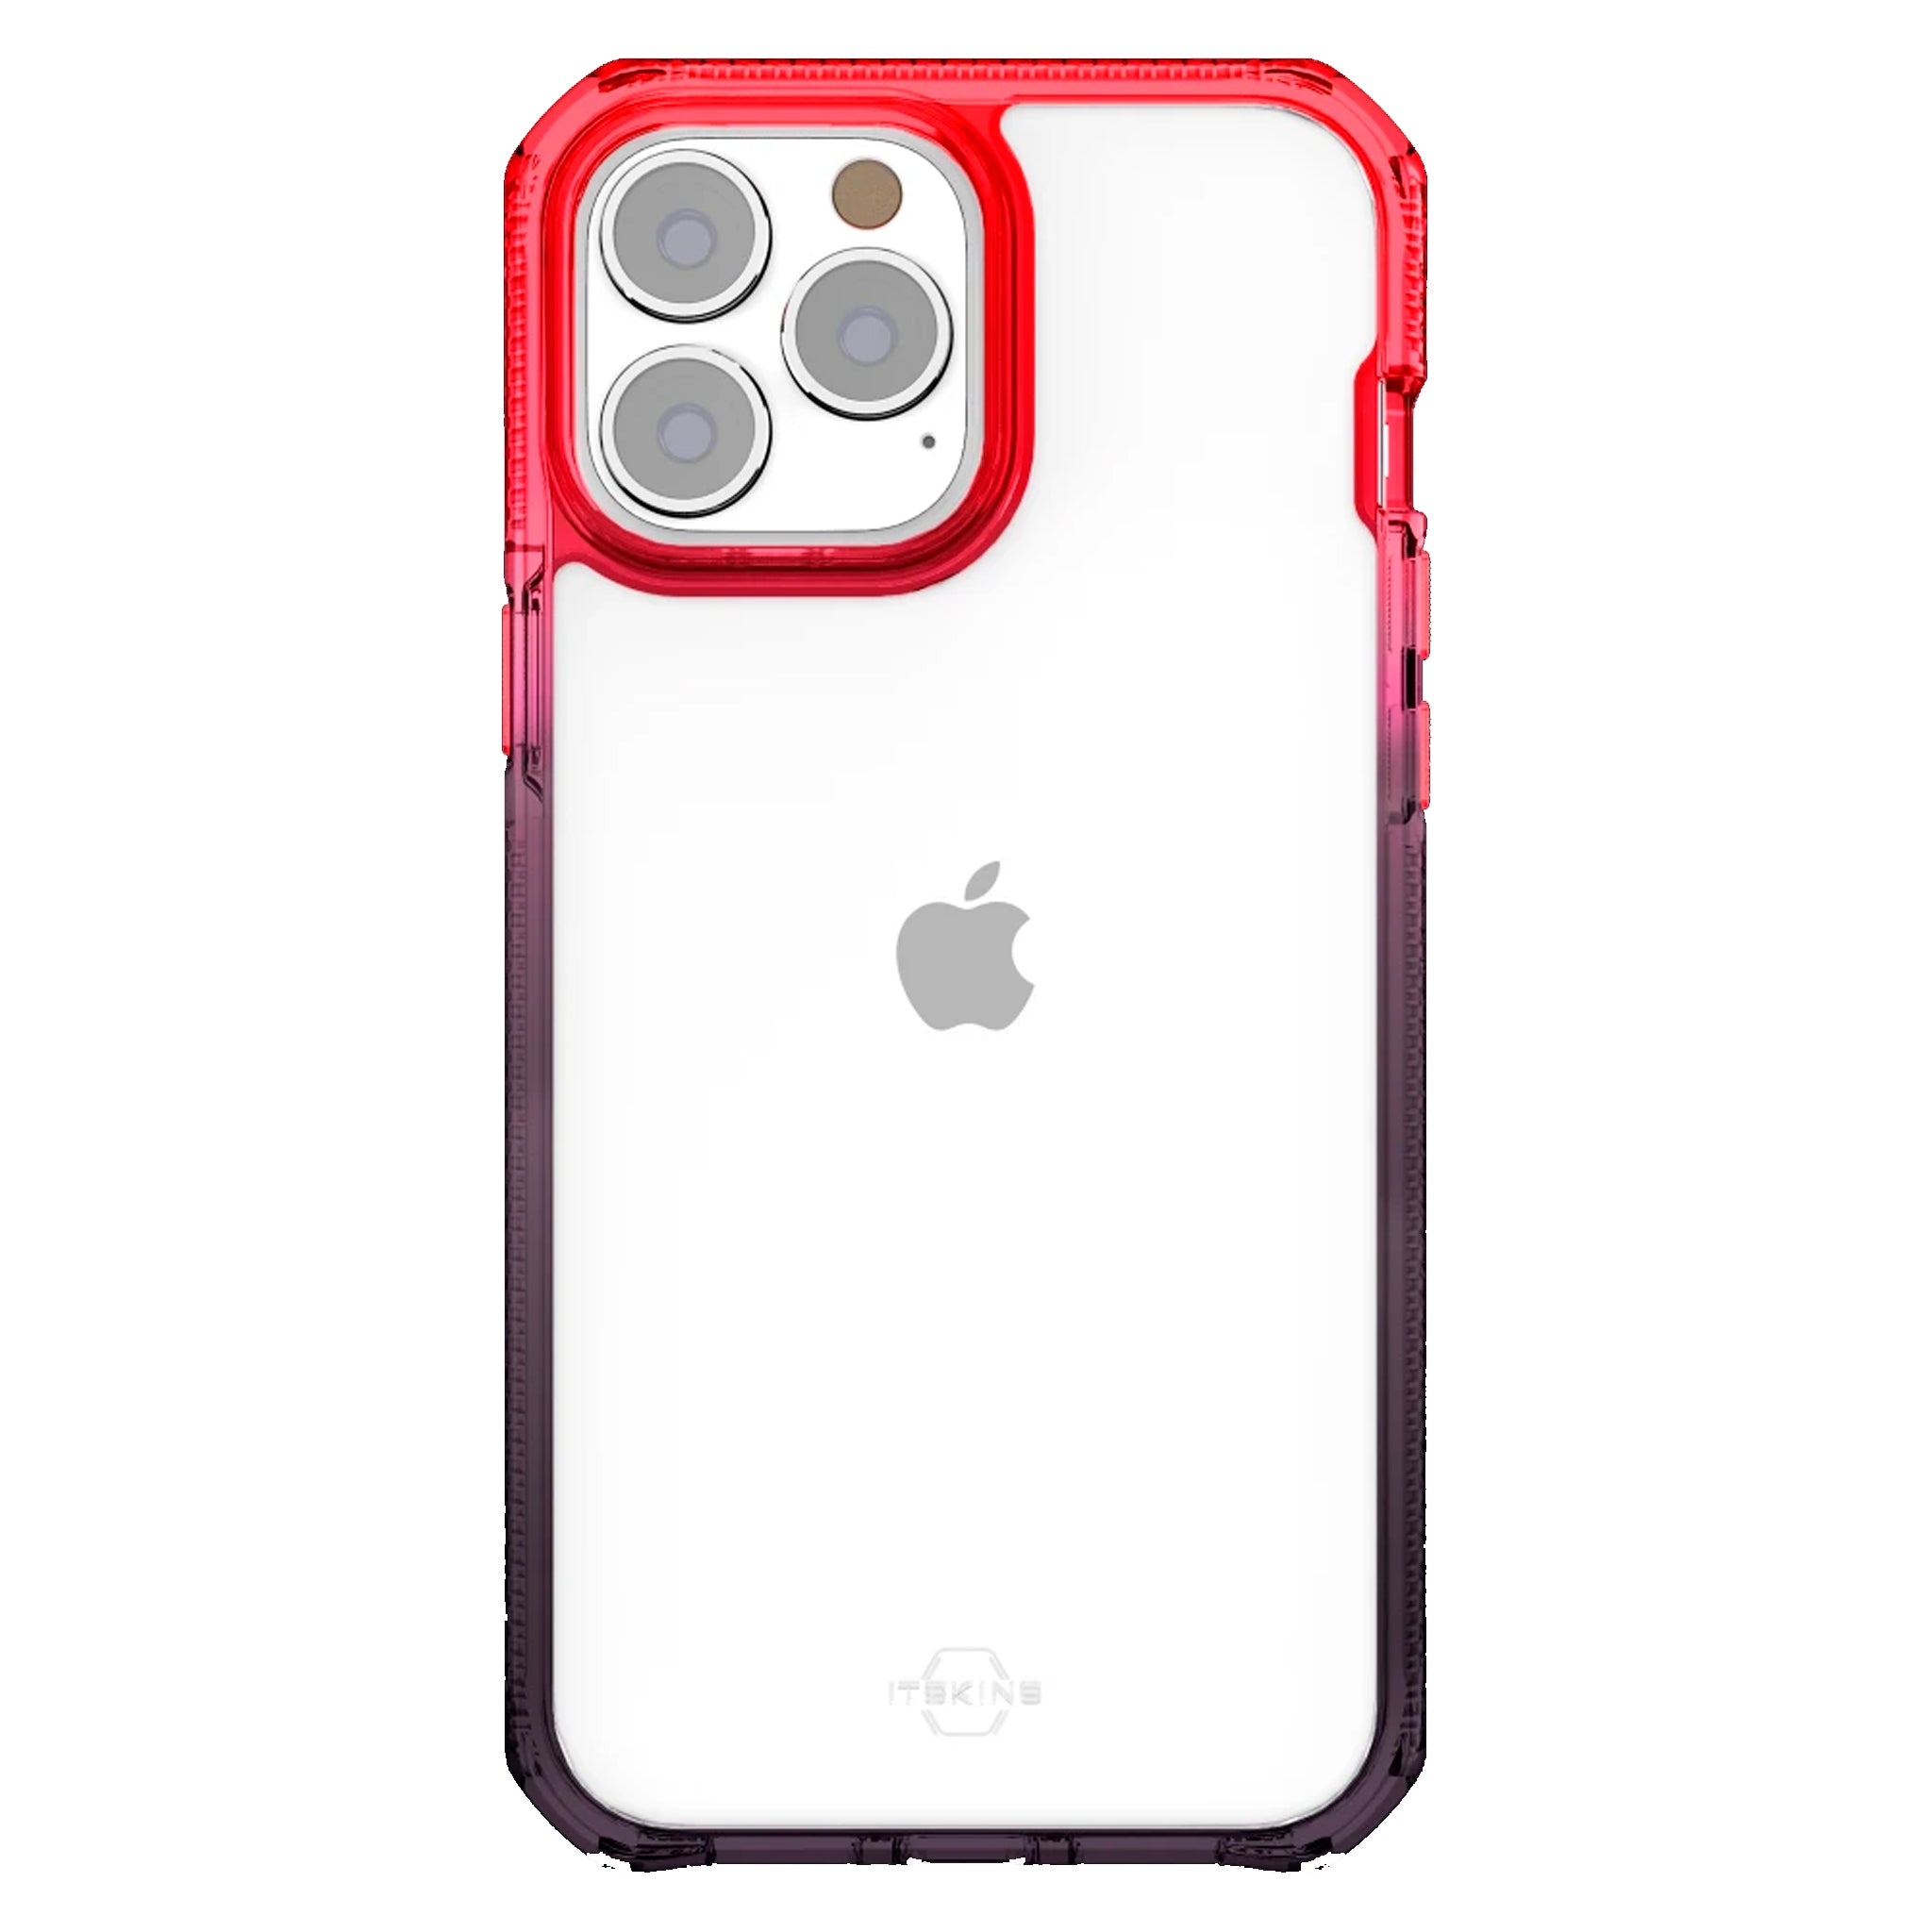 Itskins - Supreme Prism Case For Apple Iphone 13 Pro Max / 12 Pro Max - Coral And Black